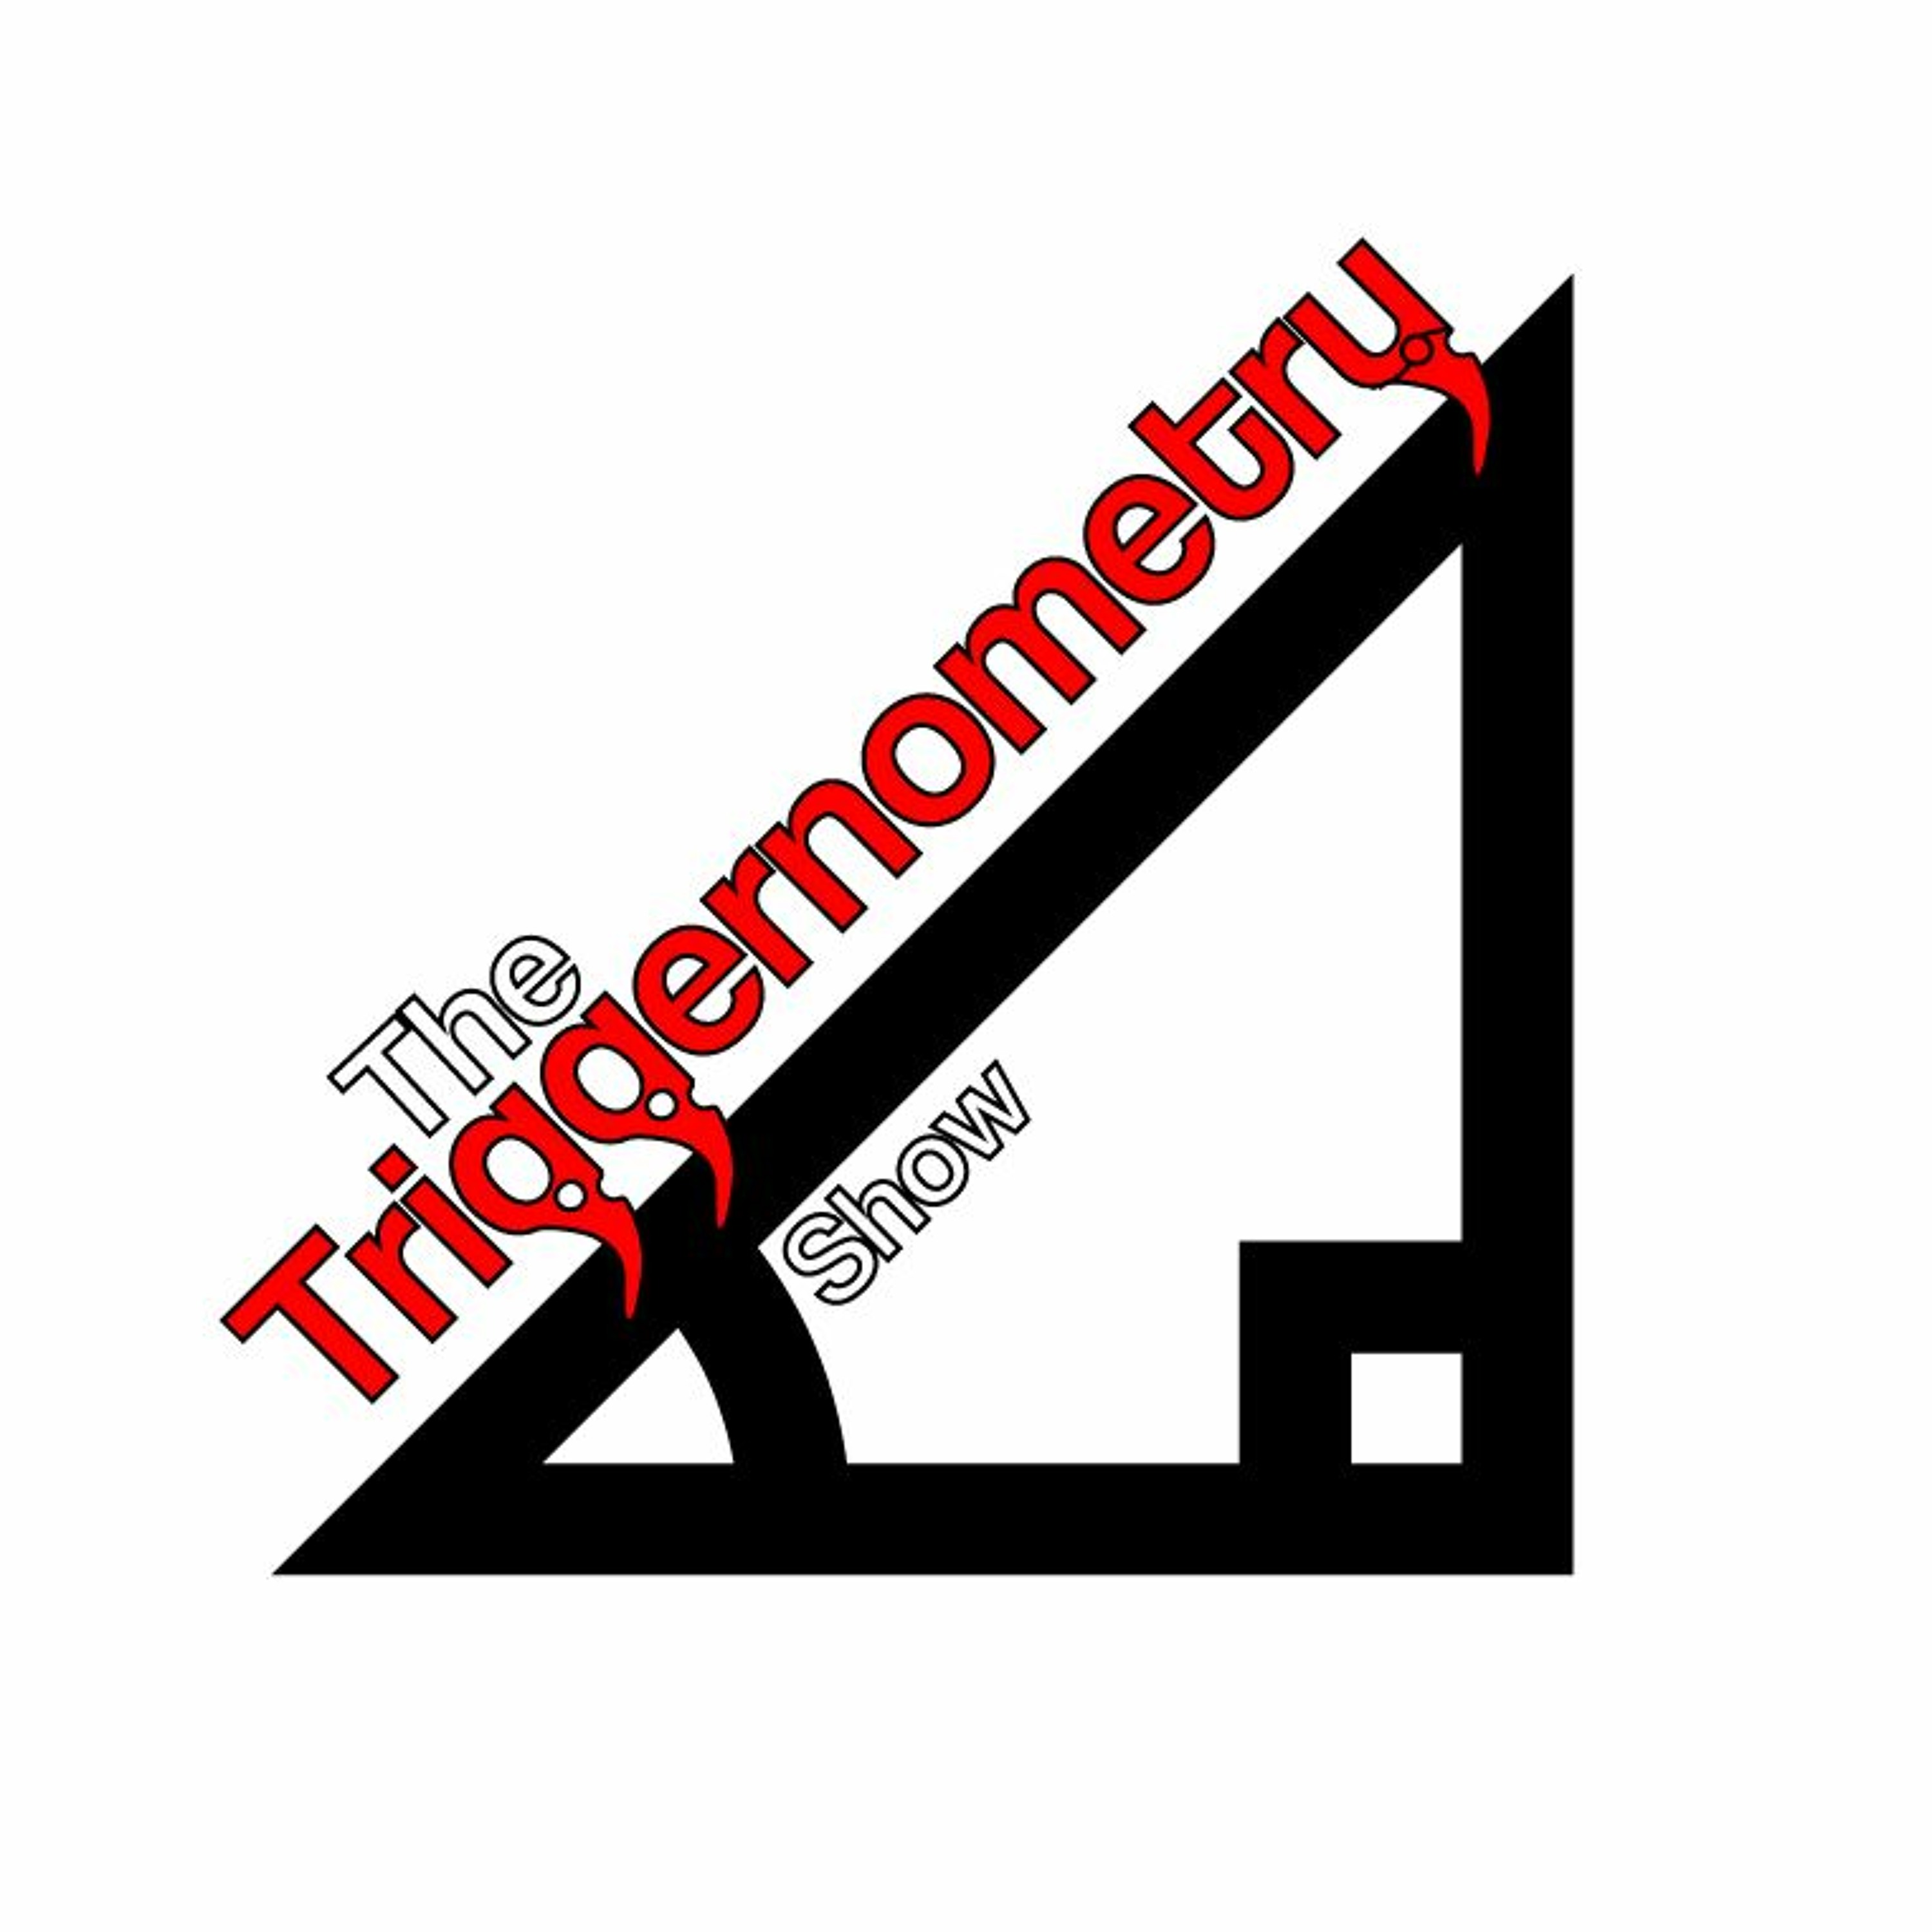 The Triggernometry Show - Andrew - Movie Armourer - Firearms Safety on Set